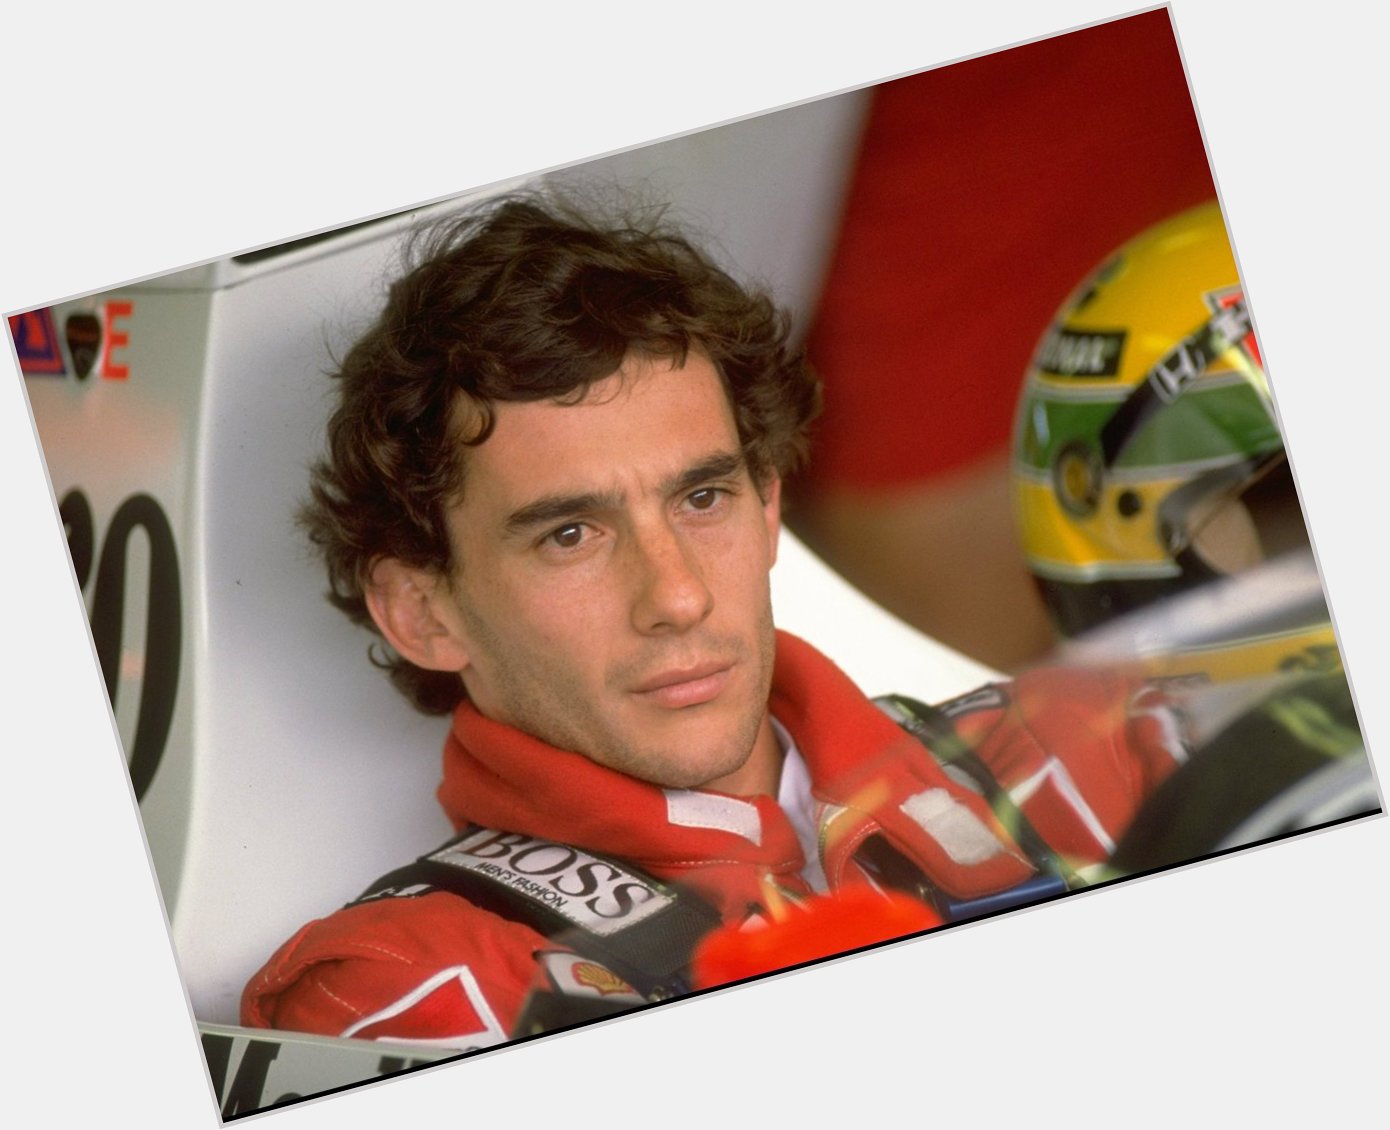 Happy Birthday to the GOAT!

Ayrton Senna would have been 62 today. But he s forever a legend! 